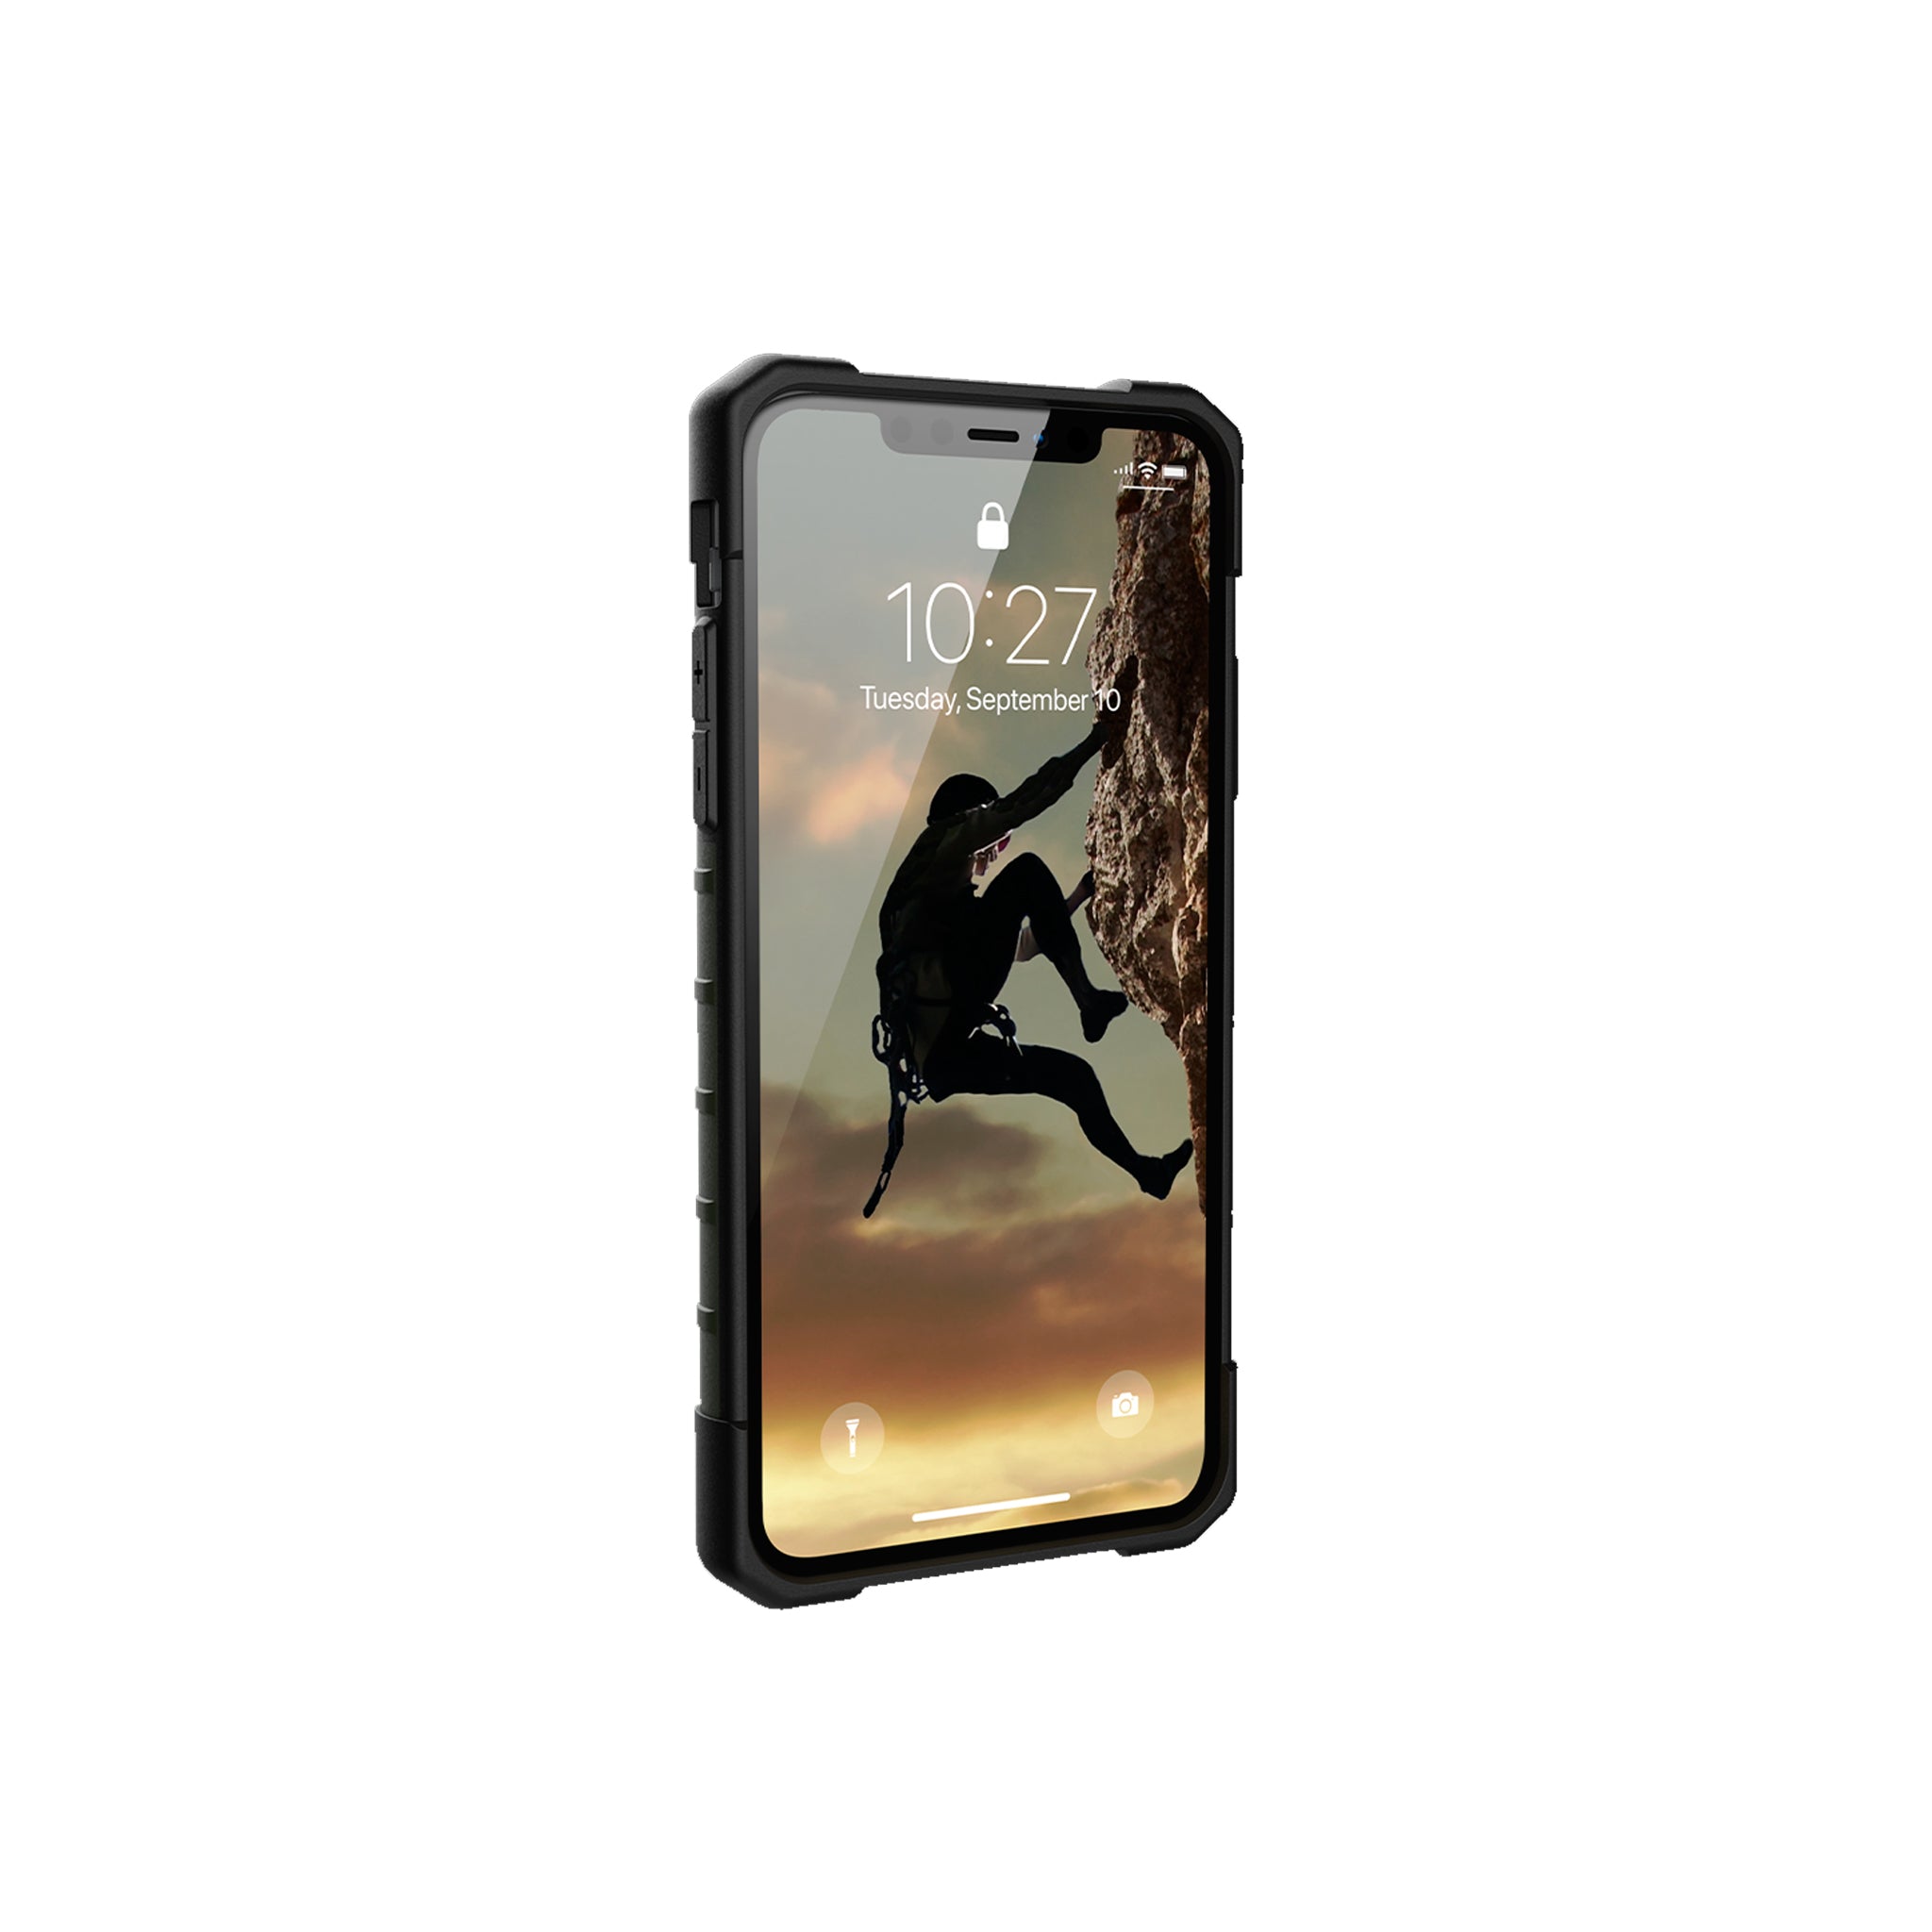 Urban Armor Gear (uag) - Pathfinder Case For Apple Iphone 11 Pro Max - Forest Camo